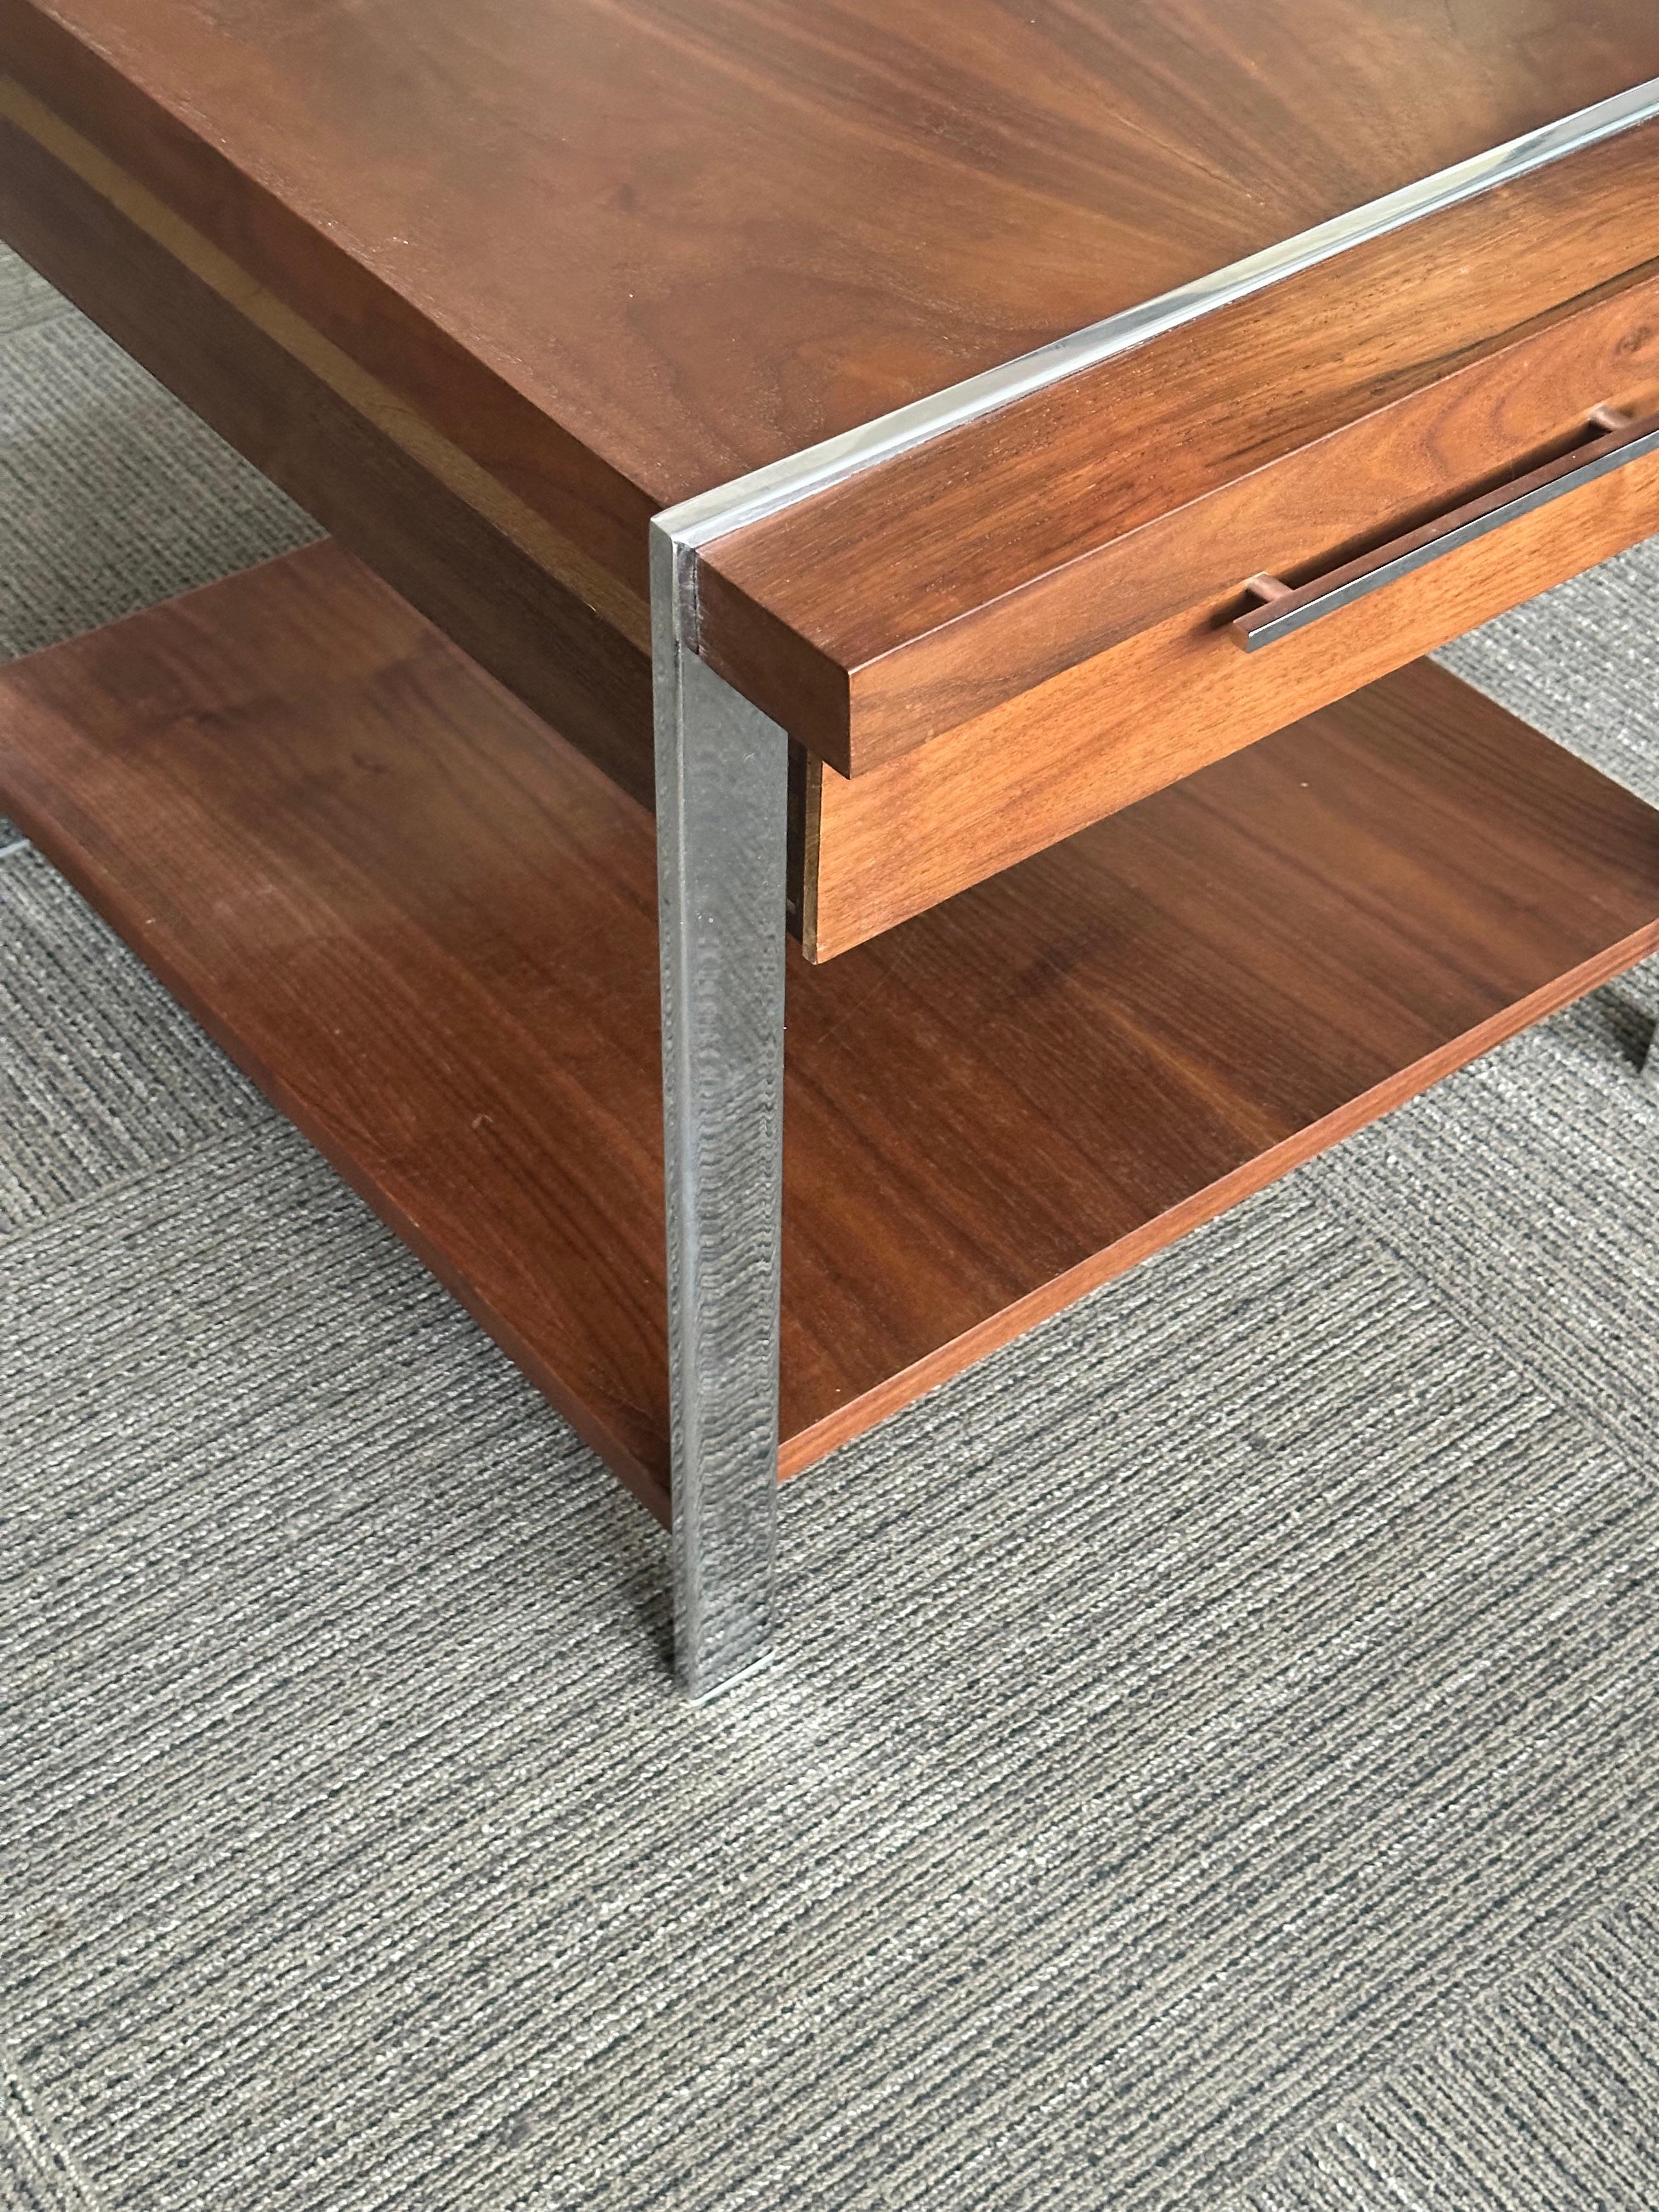 Mid-20th Century Lane Furniture Walnut, Rosewood, and Chrome End Table For Sale